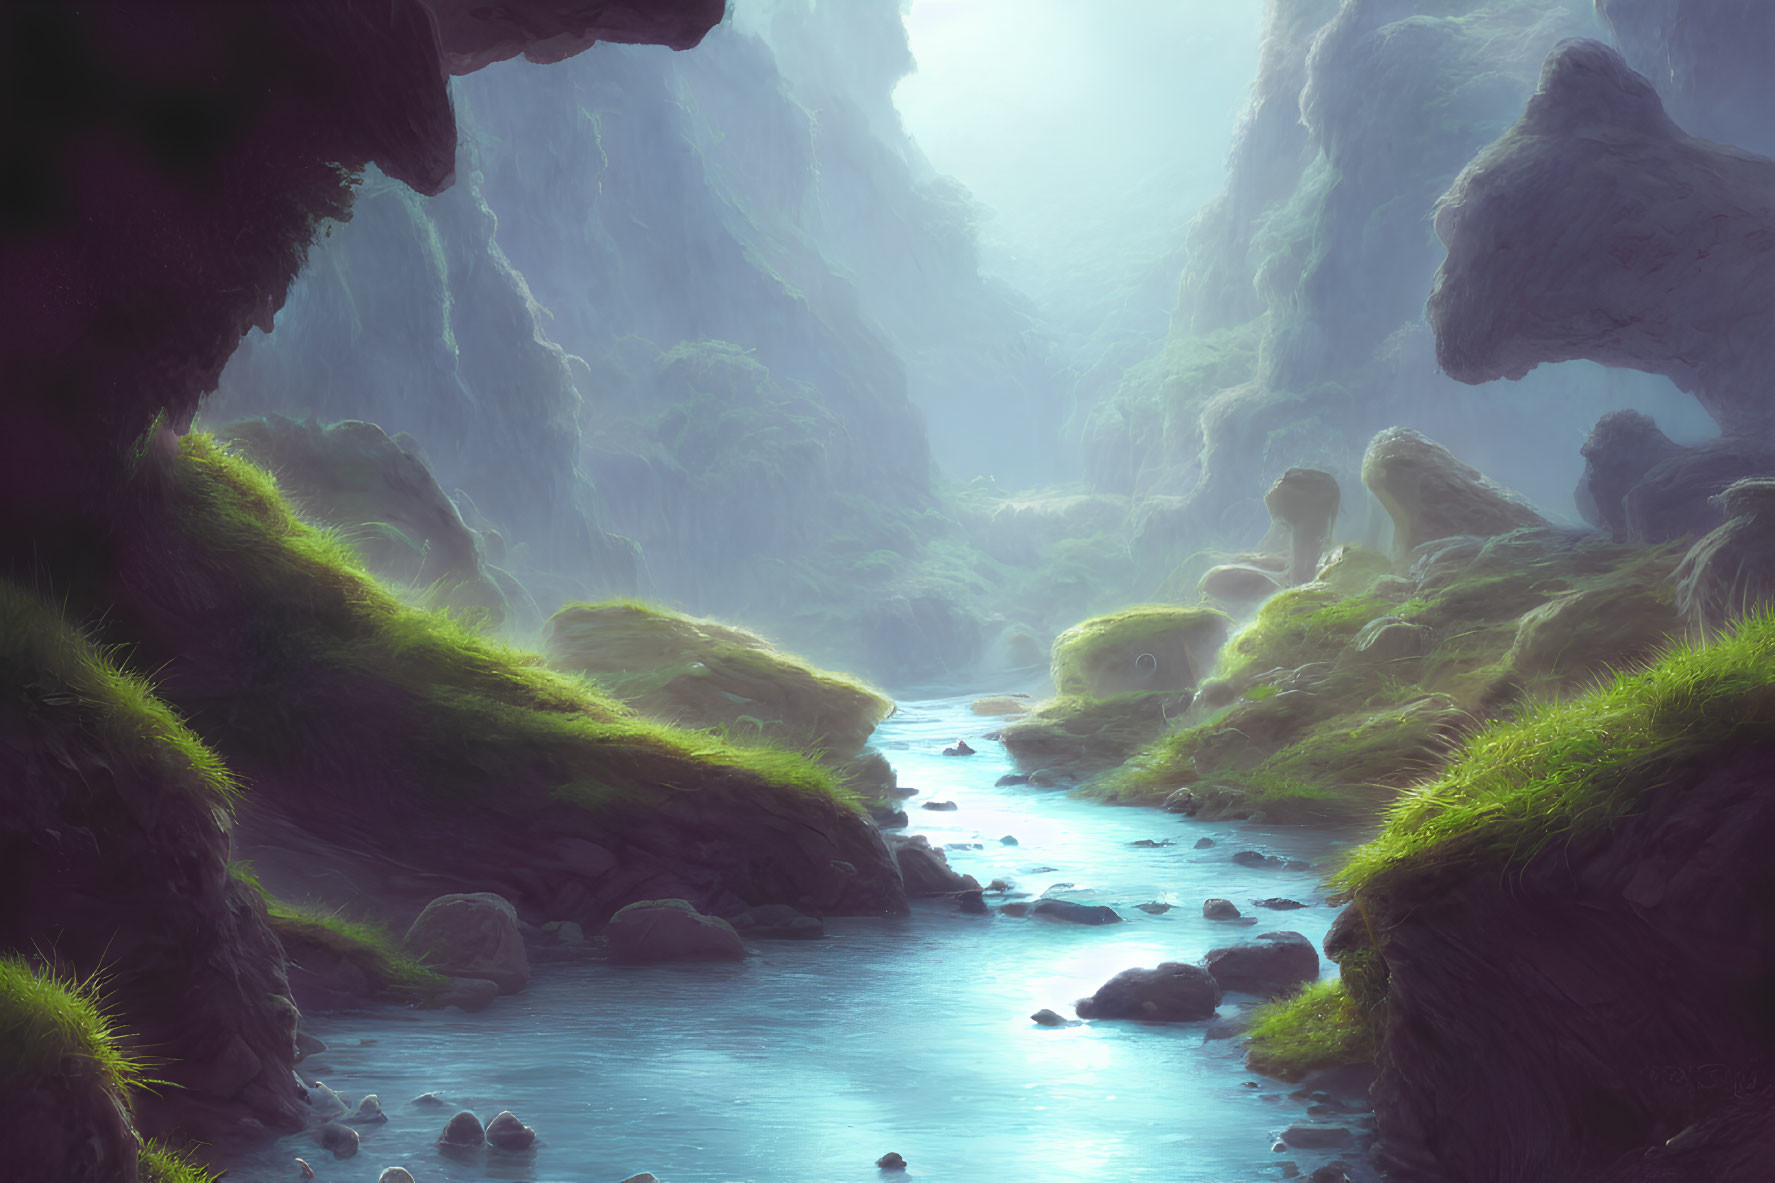 Luminous river in lush grass canyon with sunlight mist.